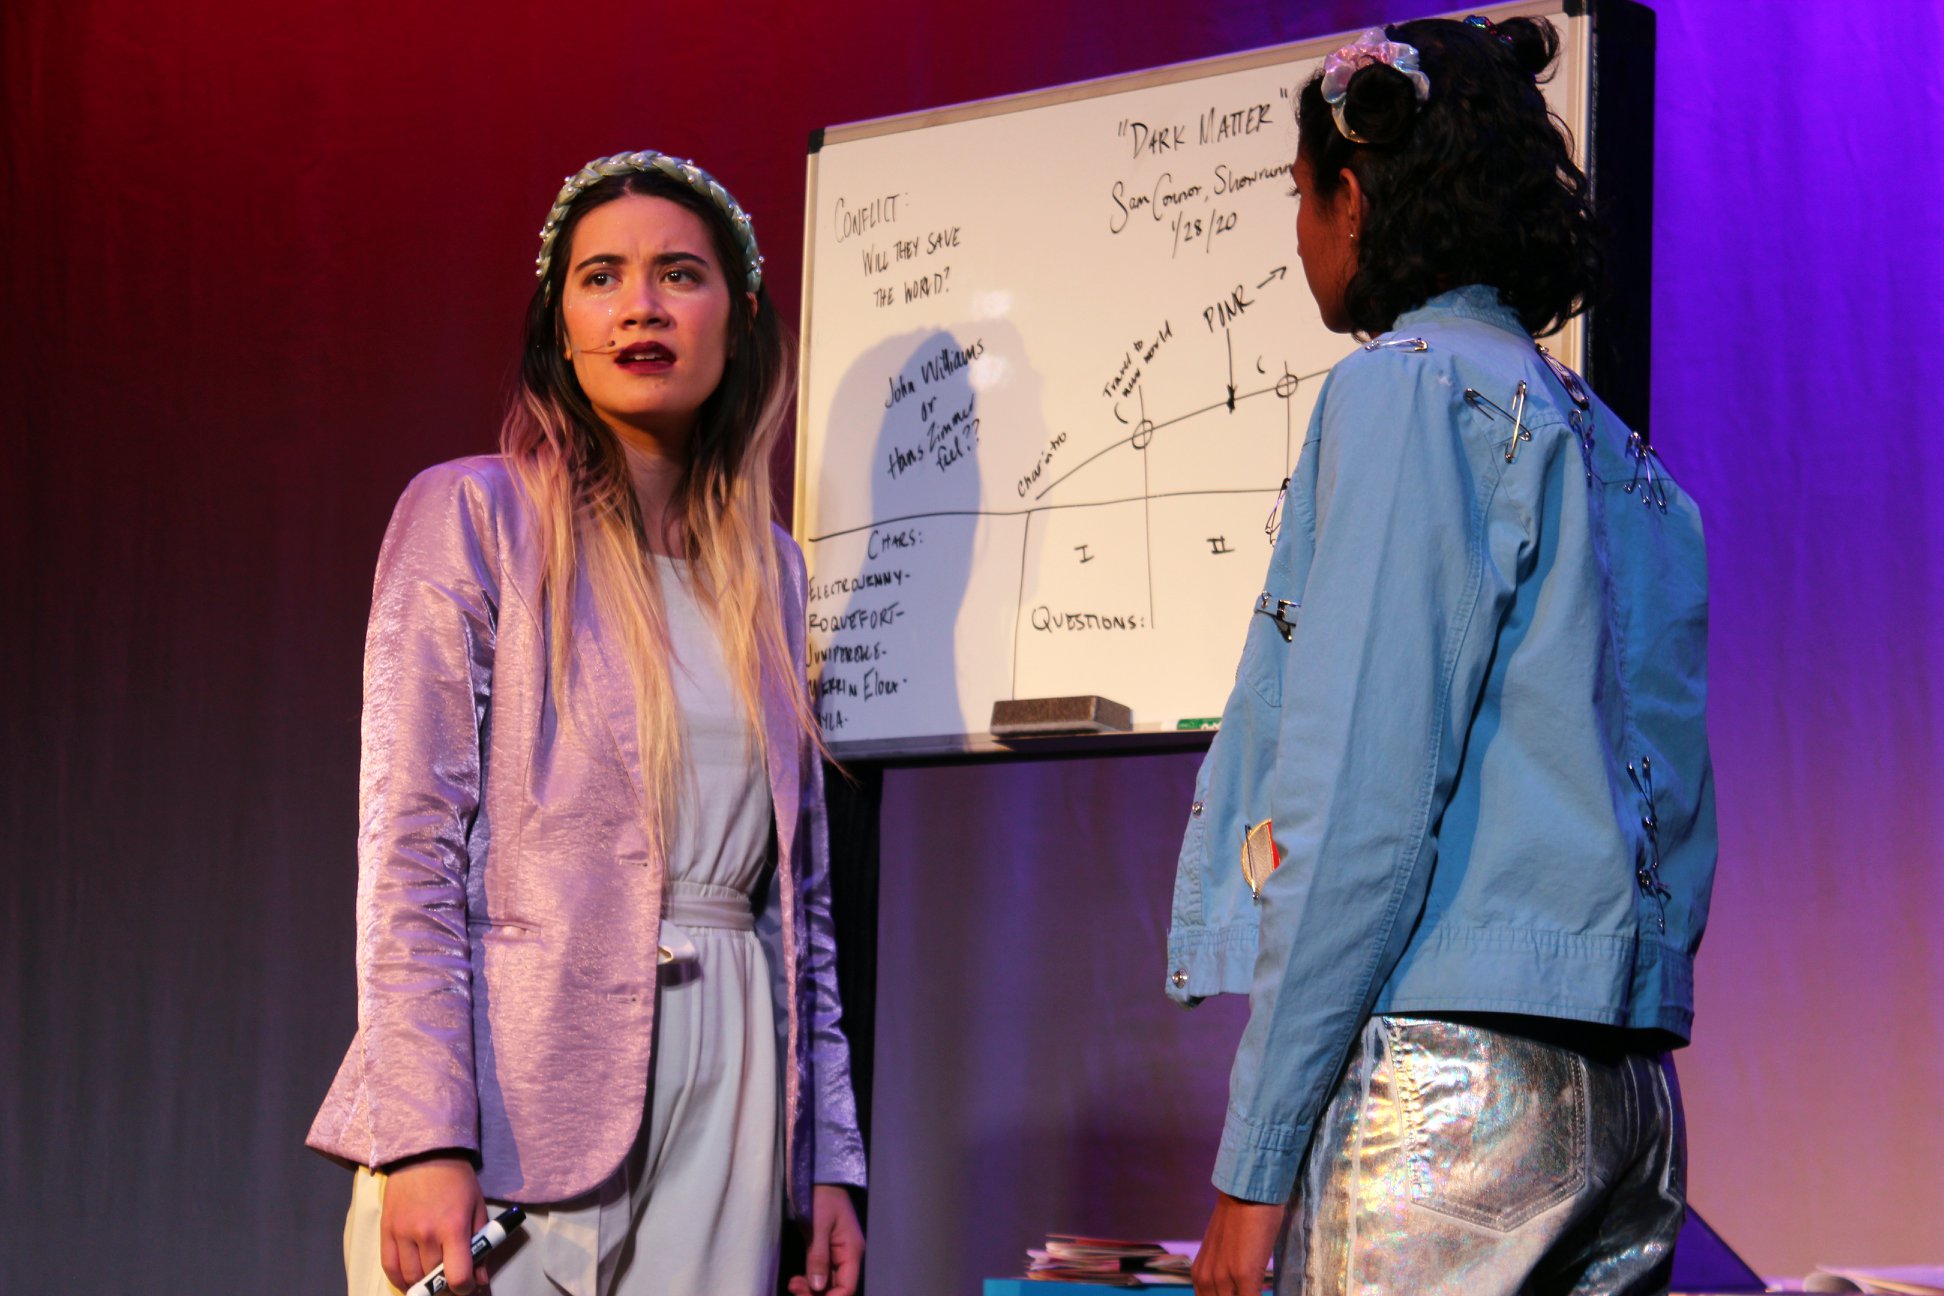 Sam (Stephanie Fongheiser) laments her work as her sister Vanessa (Nina Jayashankar) comforts her in “Double Vision” at The Edge Theater. Photo by Katy Campbell.